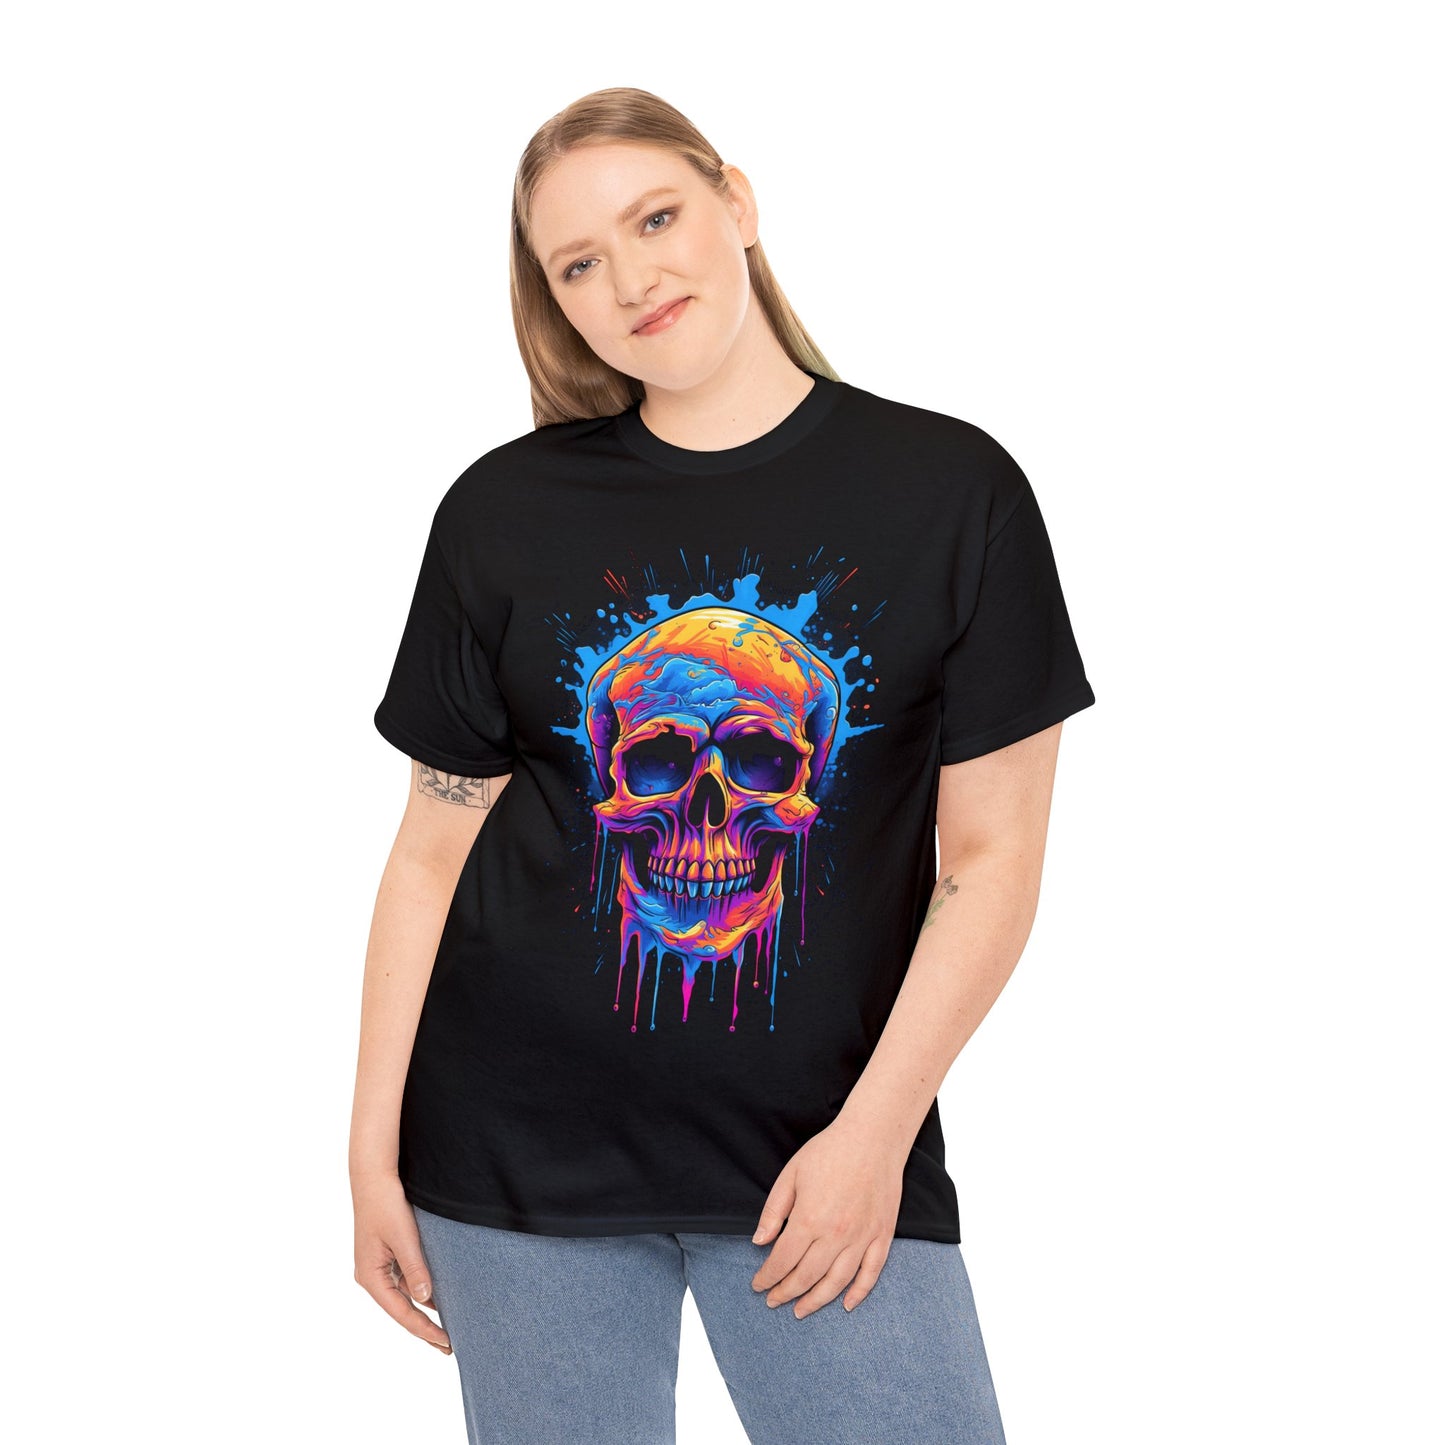 Trippy Contrast Skull Painted Graphic Design Tee